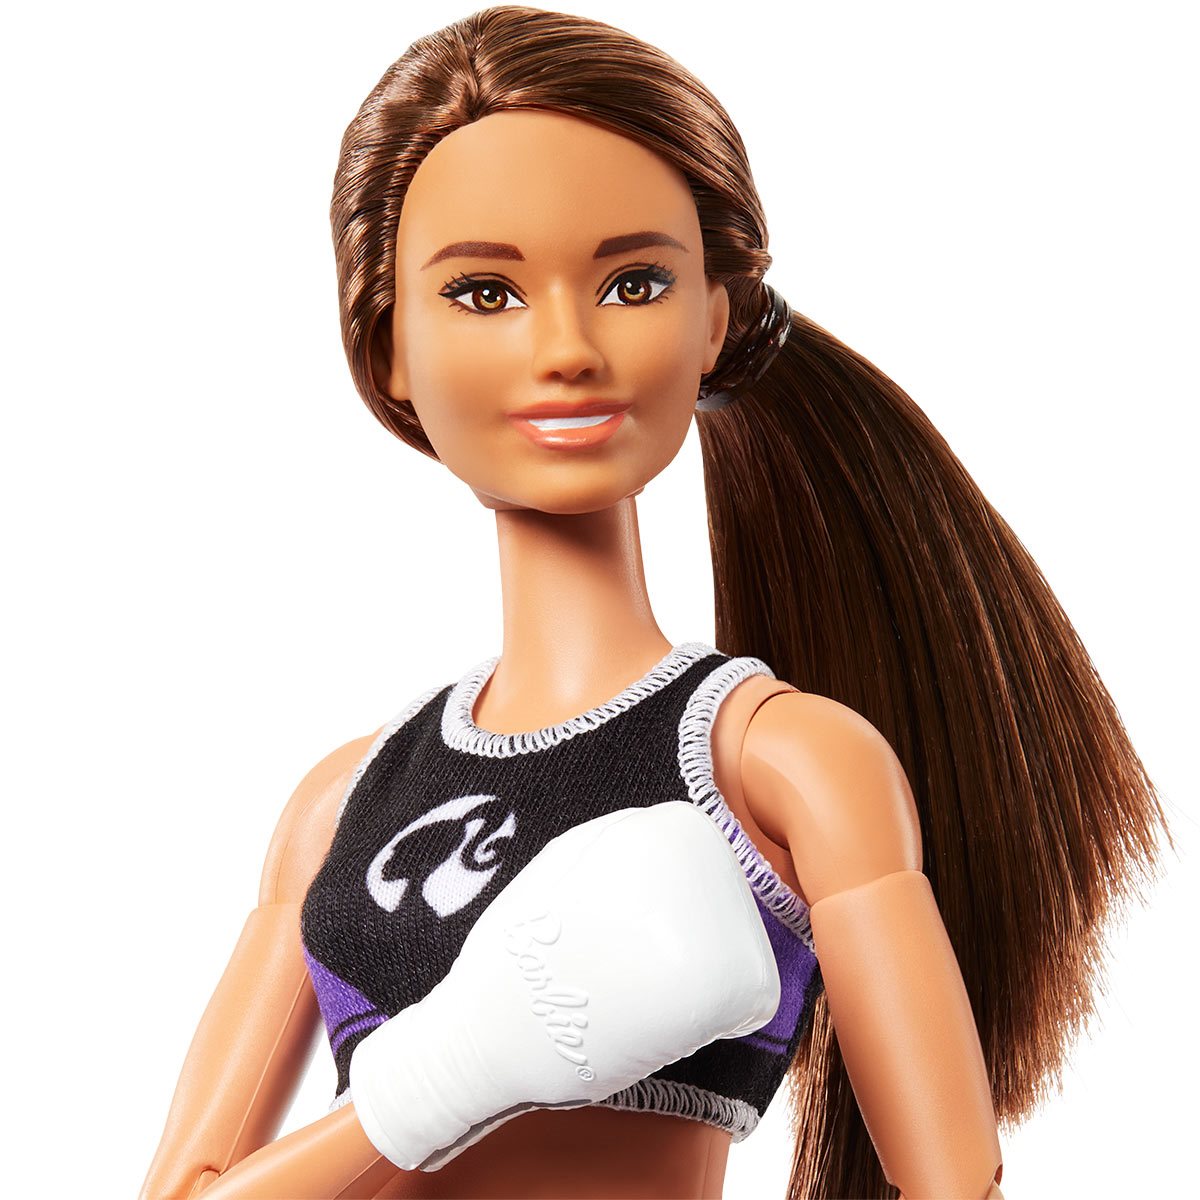 Barbie Made to Move Boxer Doll - Entertainment Earth